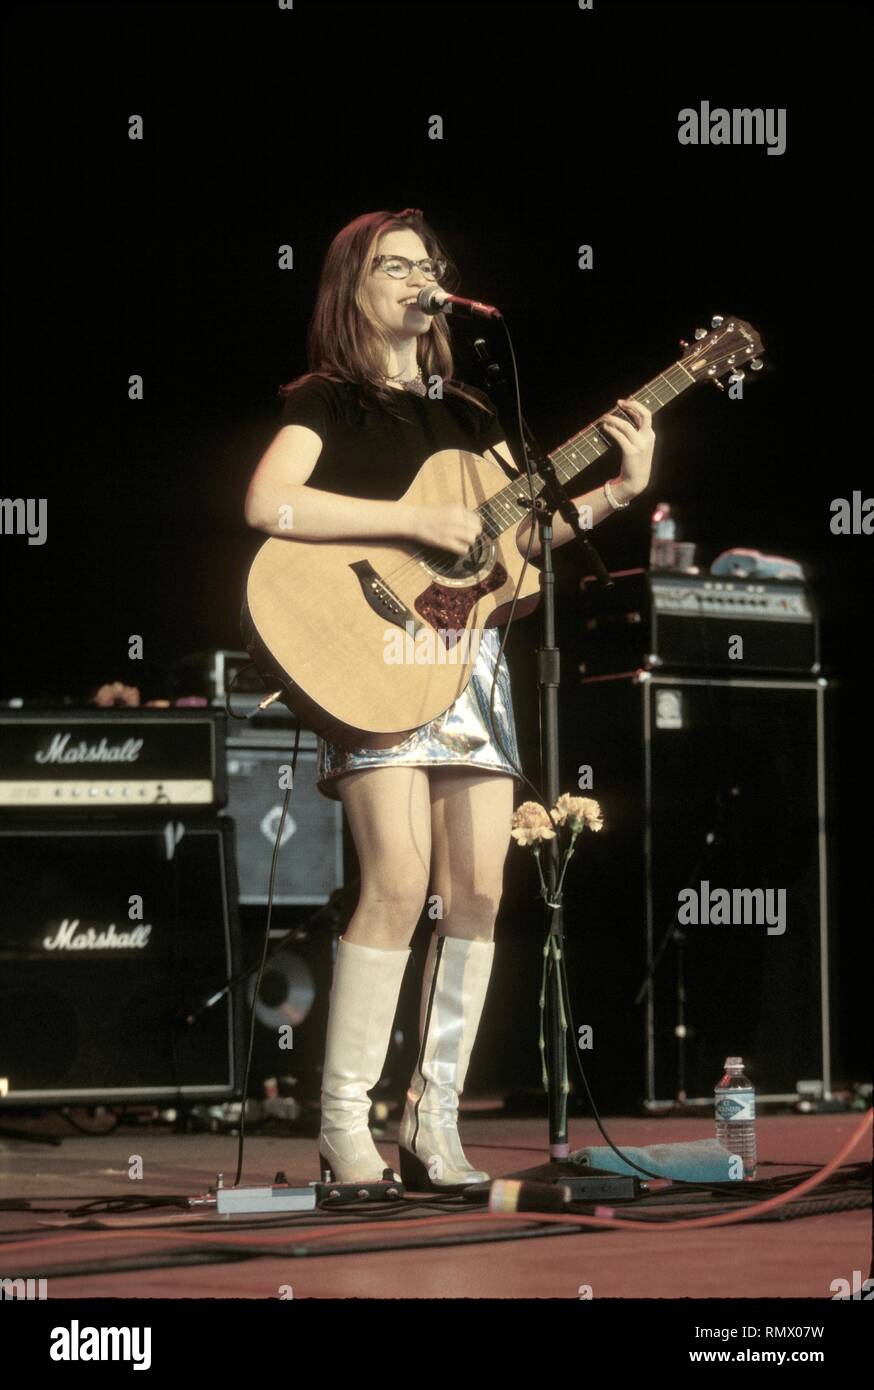 Singer, songwriter and actress Lisa Loeb is shown performing on stage during a 'live' concert appearance. Stock Photo